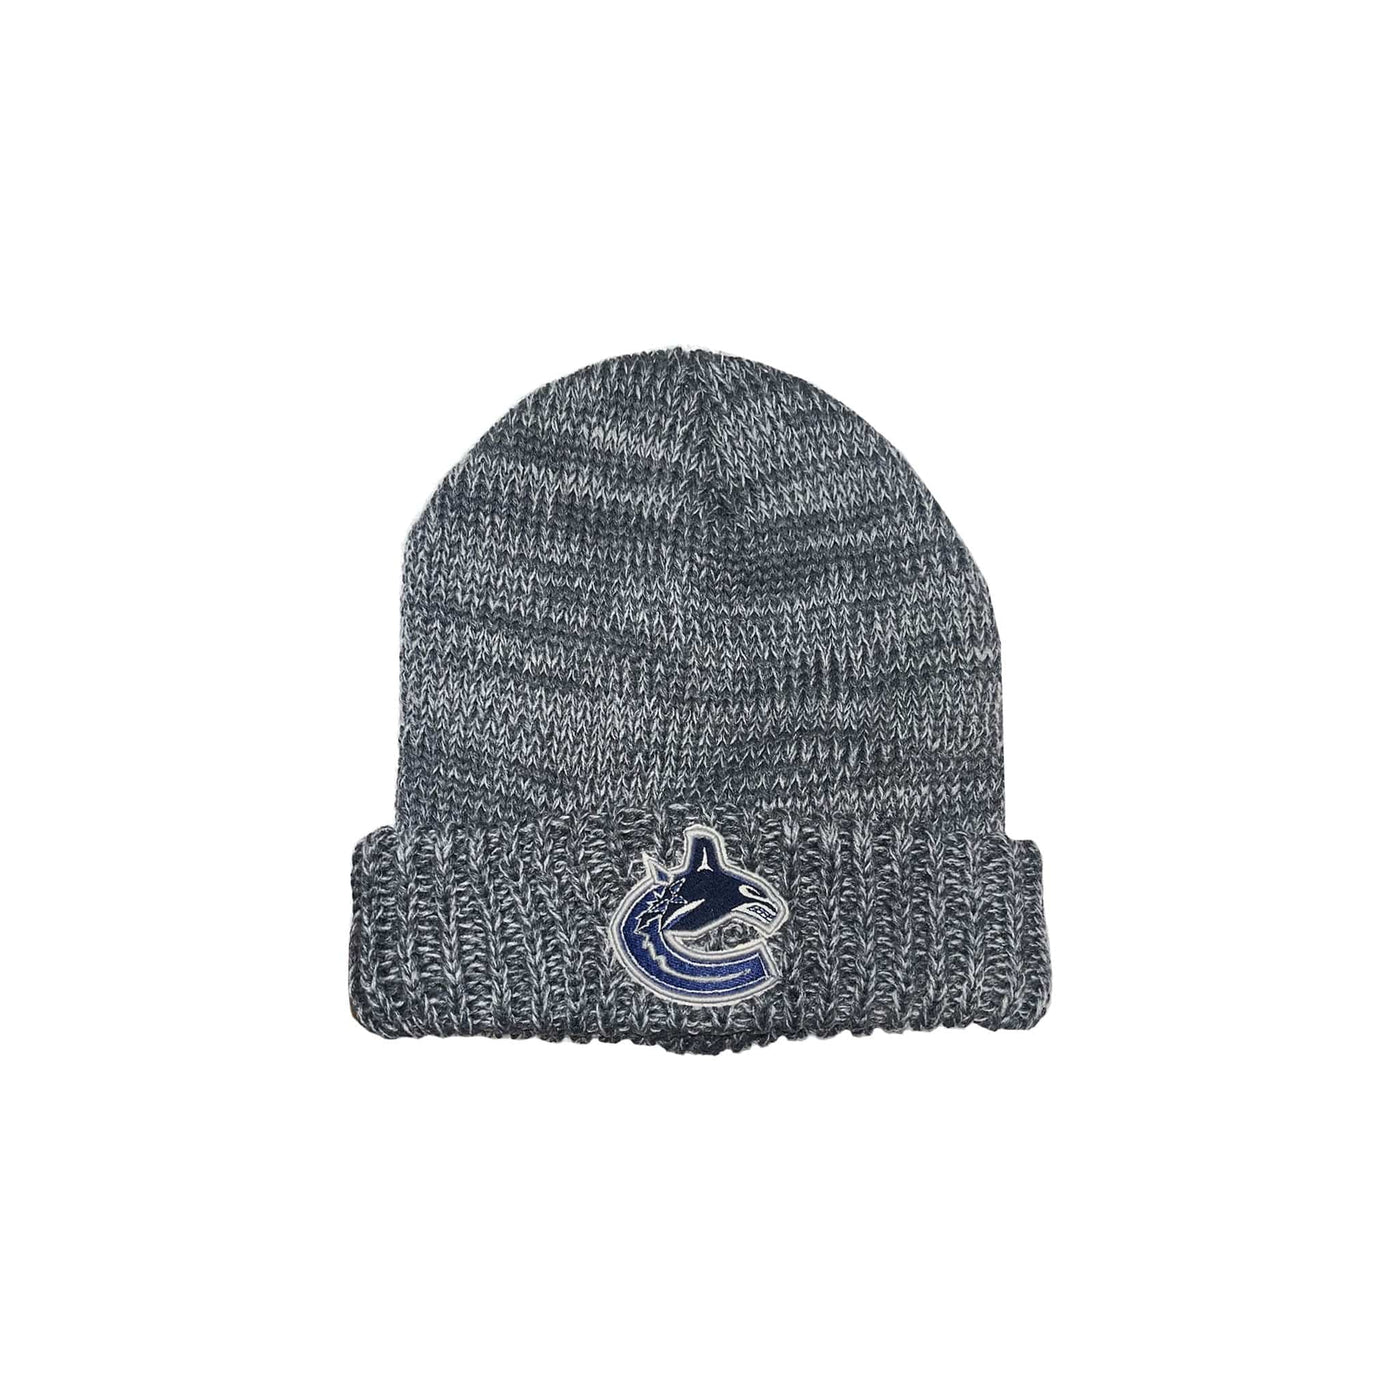 American Needle NHL Sterling Knit Toque - Vancouver Canucks - TheHockeyShop.com